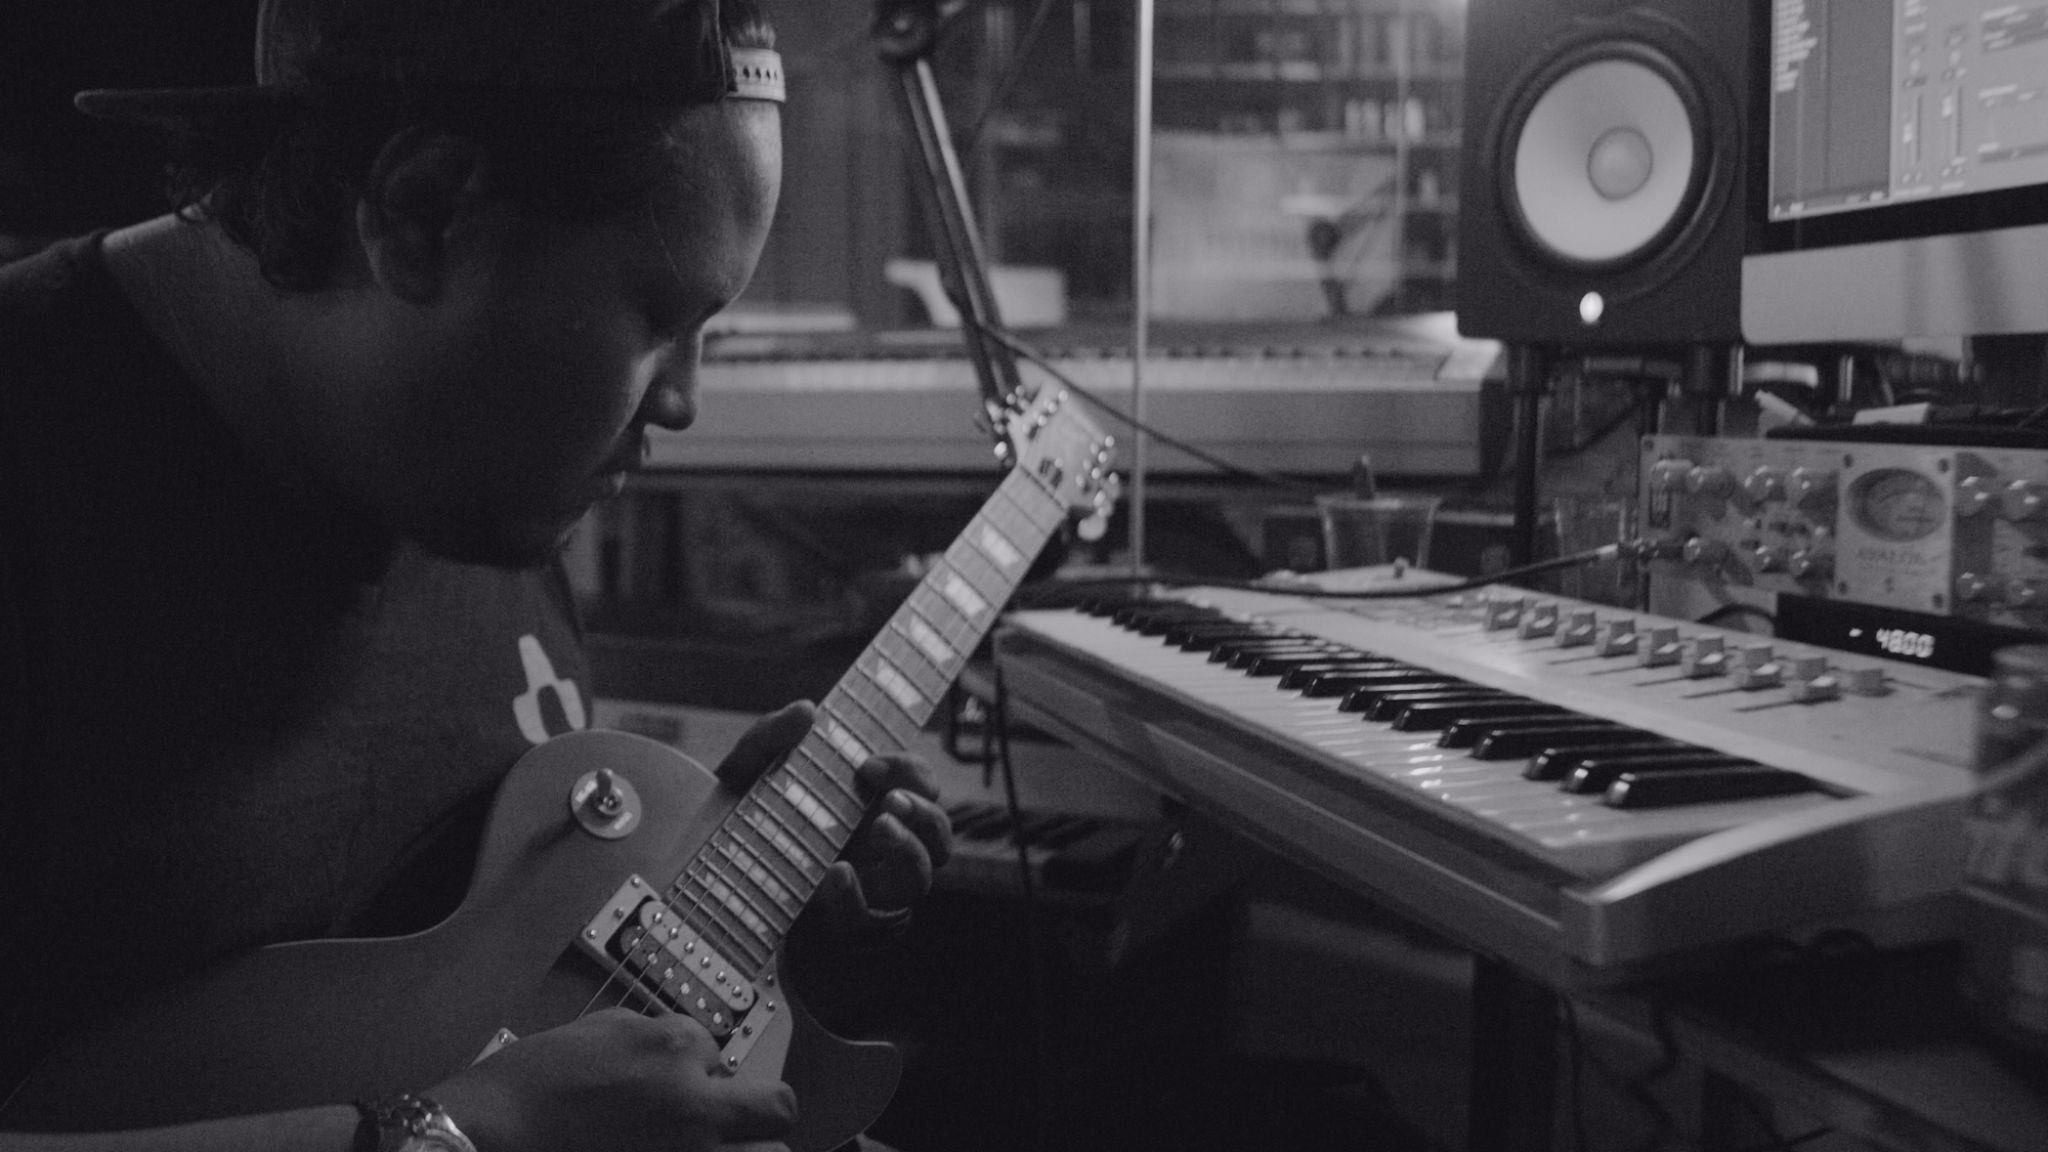 Black and white side profile of man playing a guitar by a keyboard in a studio